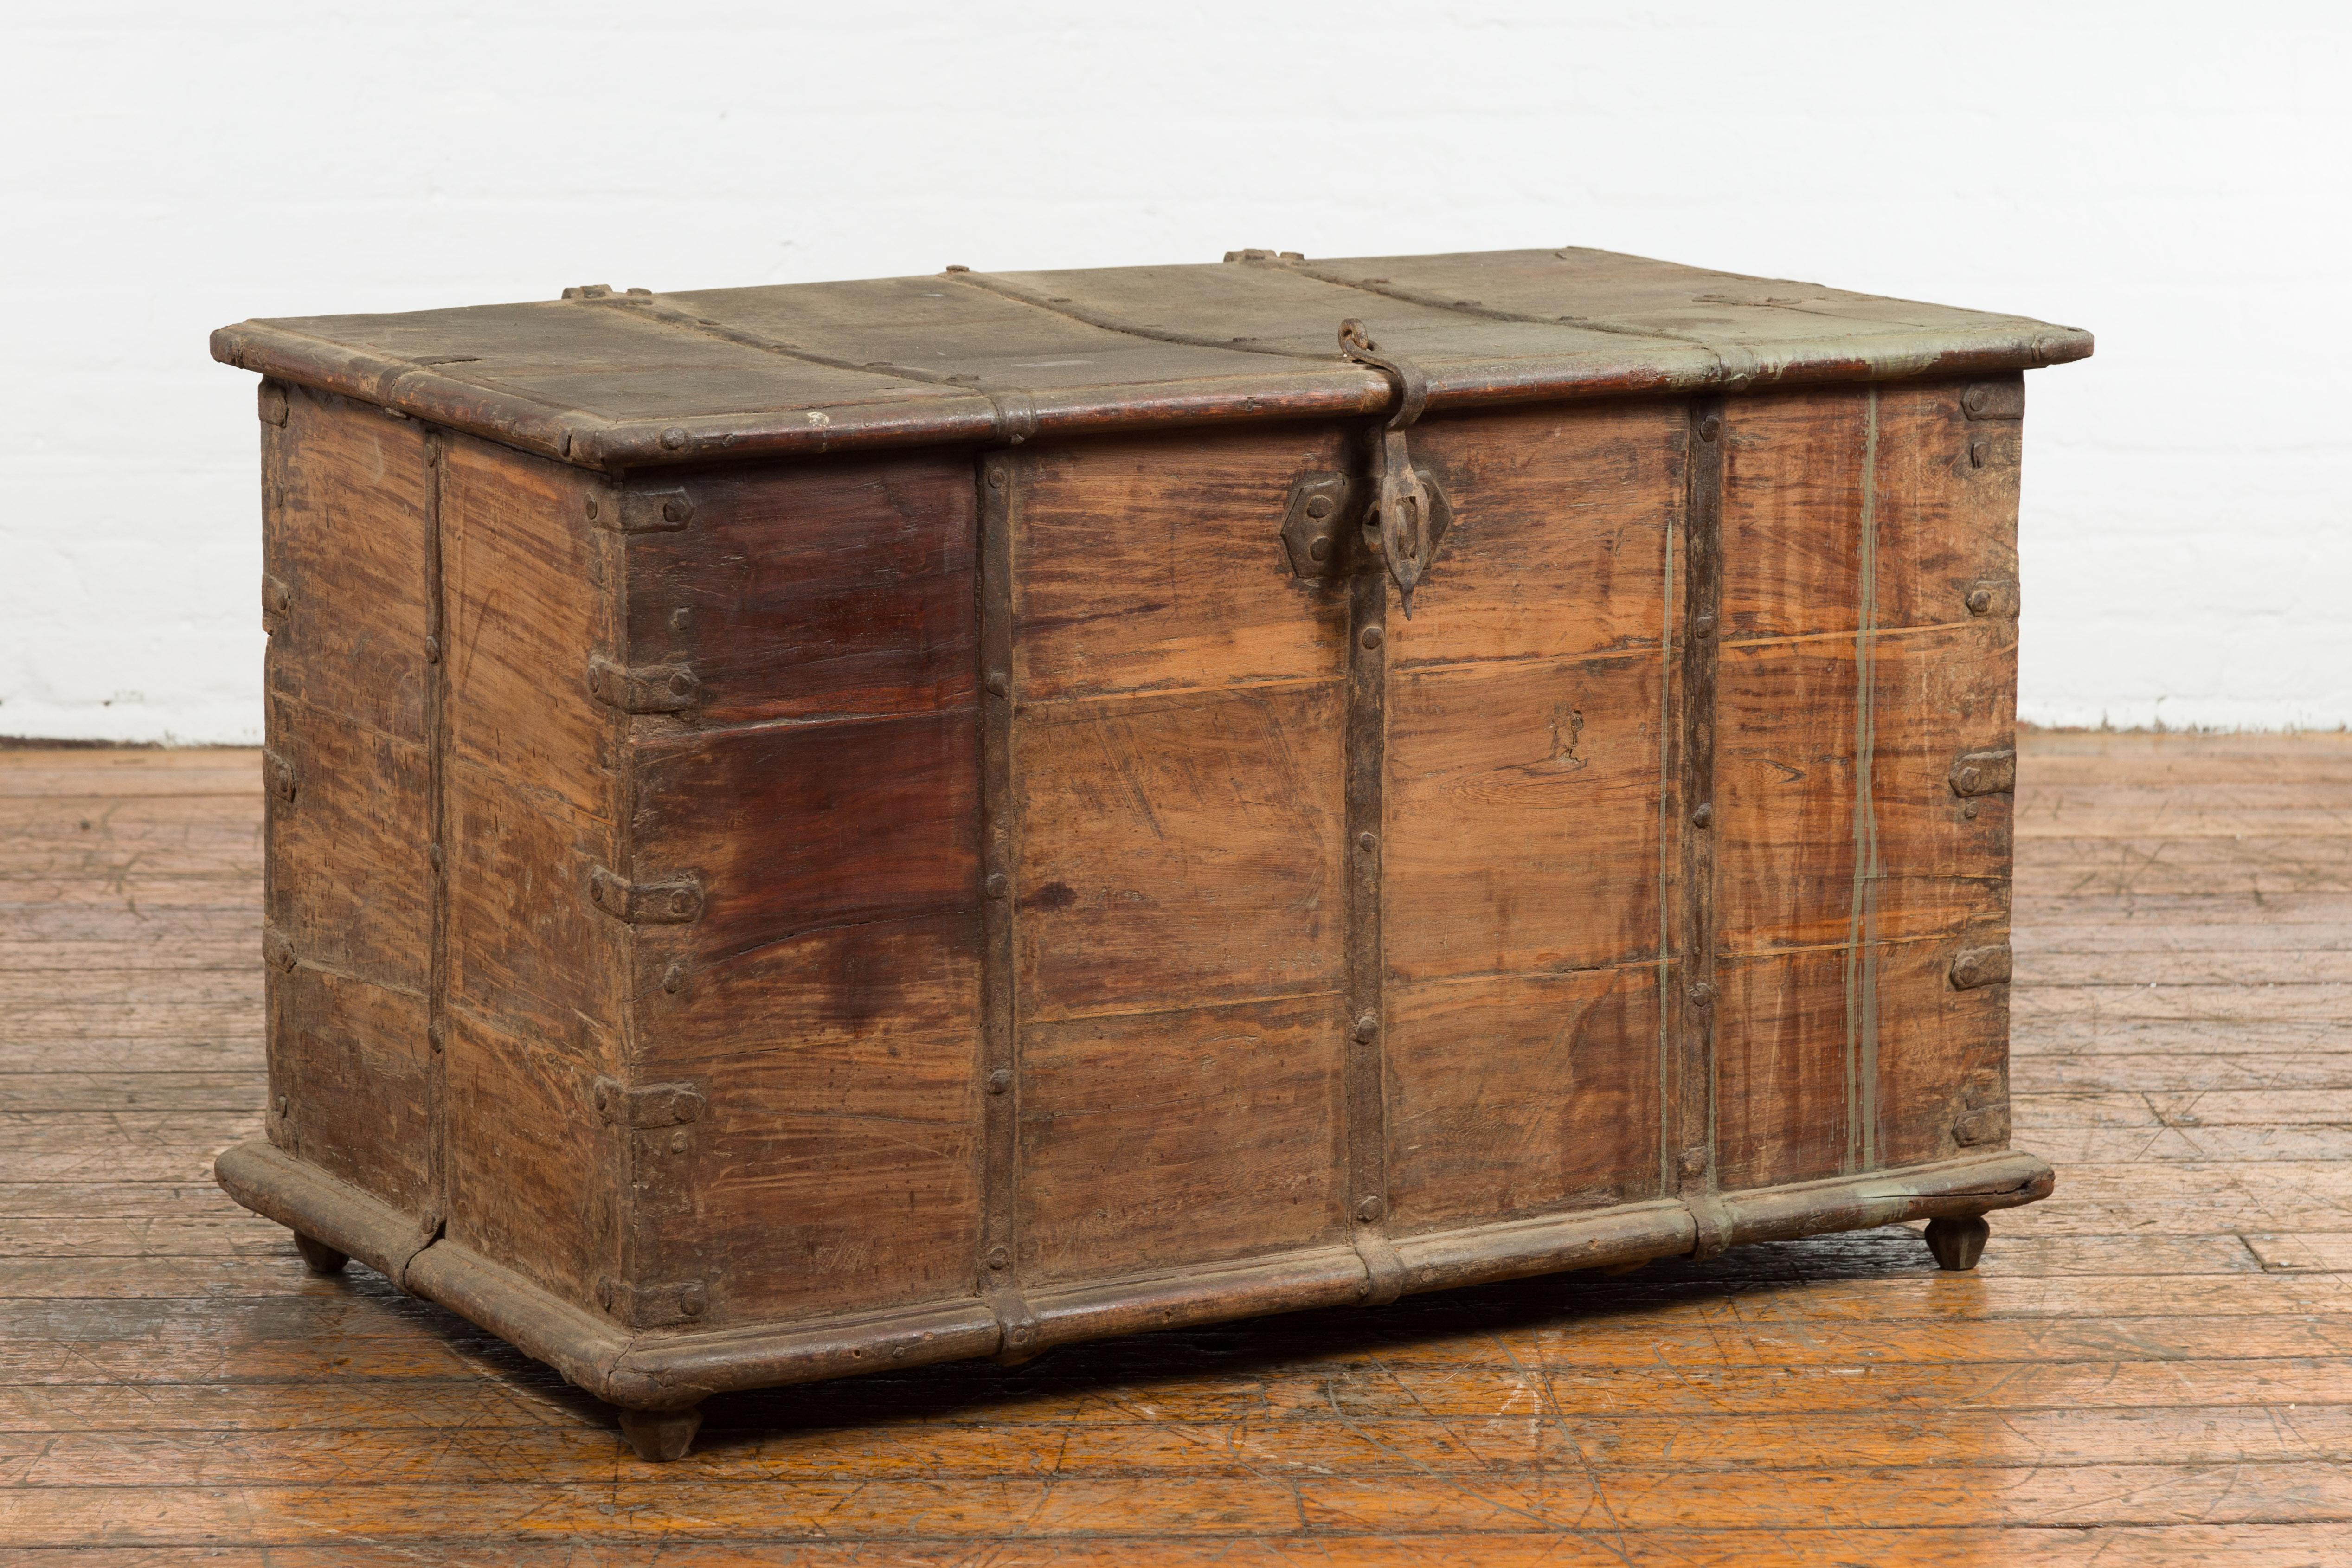 An Indonesian wooden blanket chest from the 19th century with brass hardware and rustic character. Introducing this 19th-century Indonesian wooden blanket chest, a charismatic fusion of functional design and rustic aesthetics. Crafted meticulously